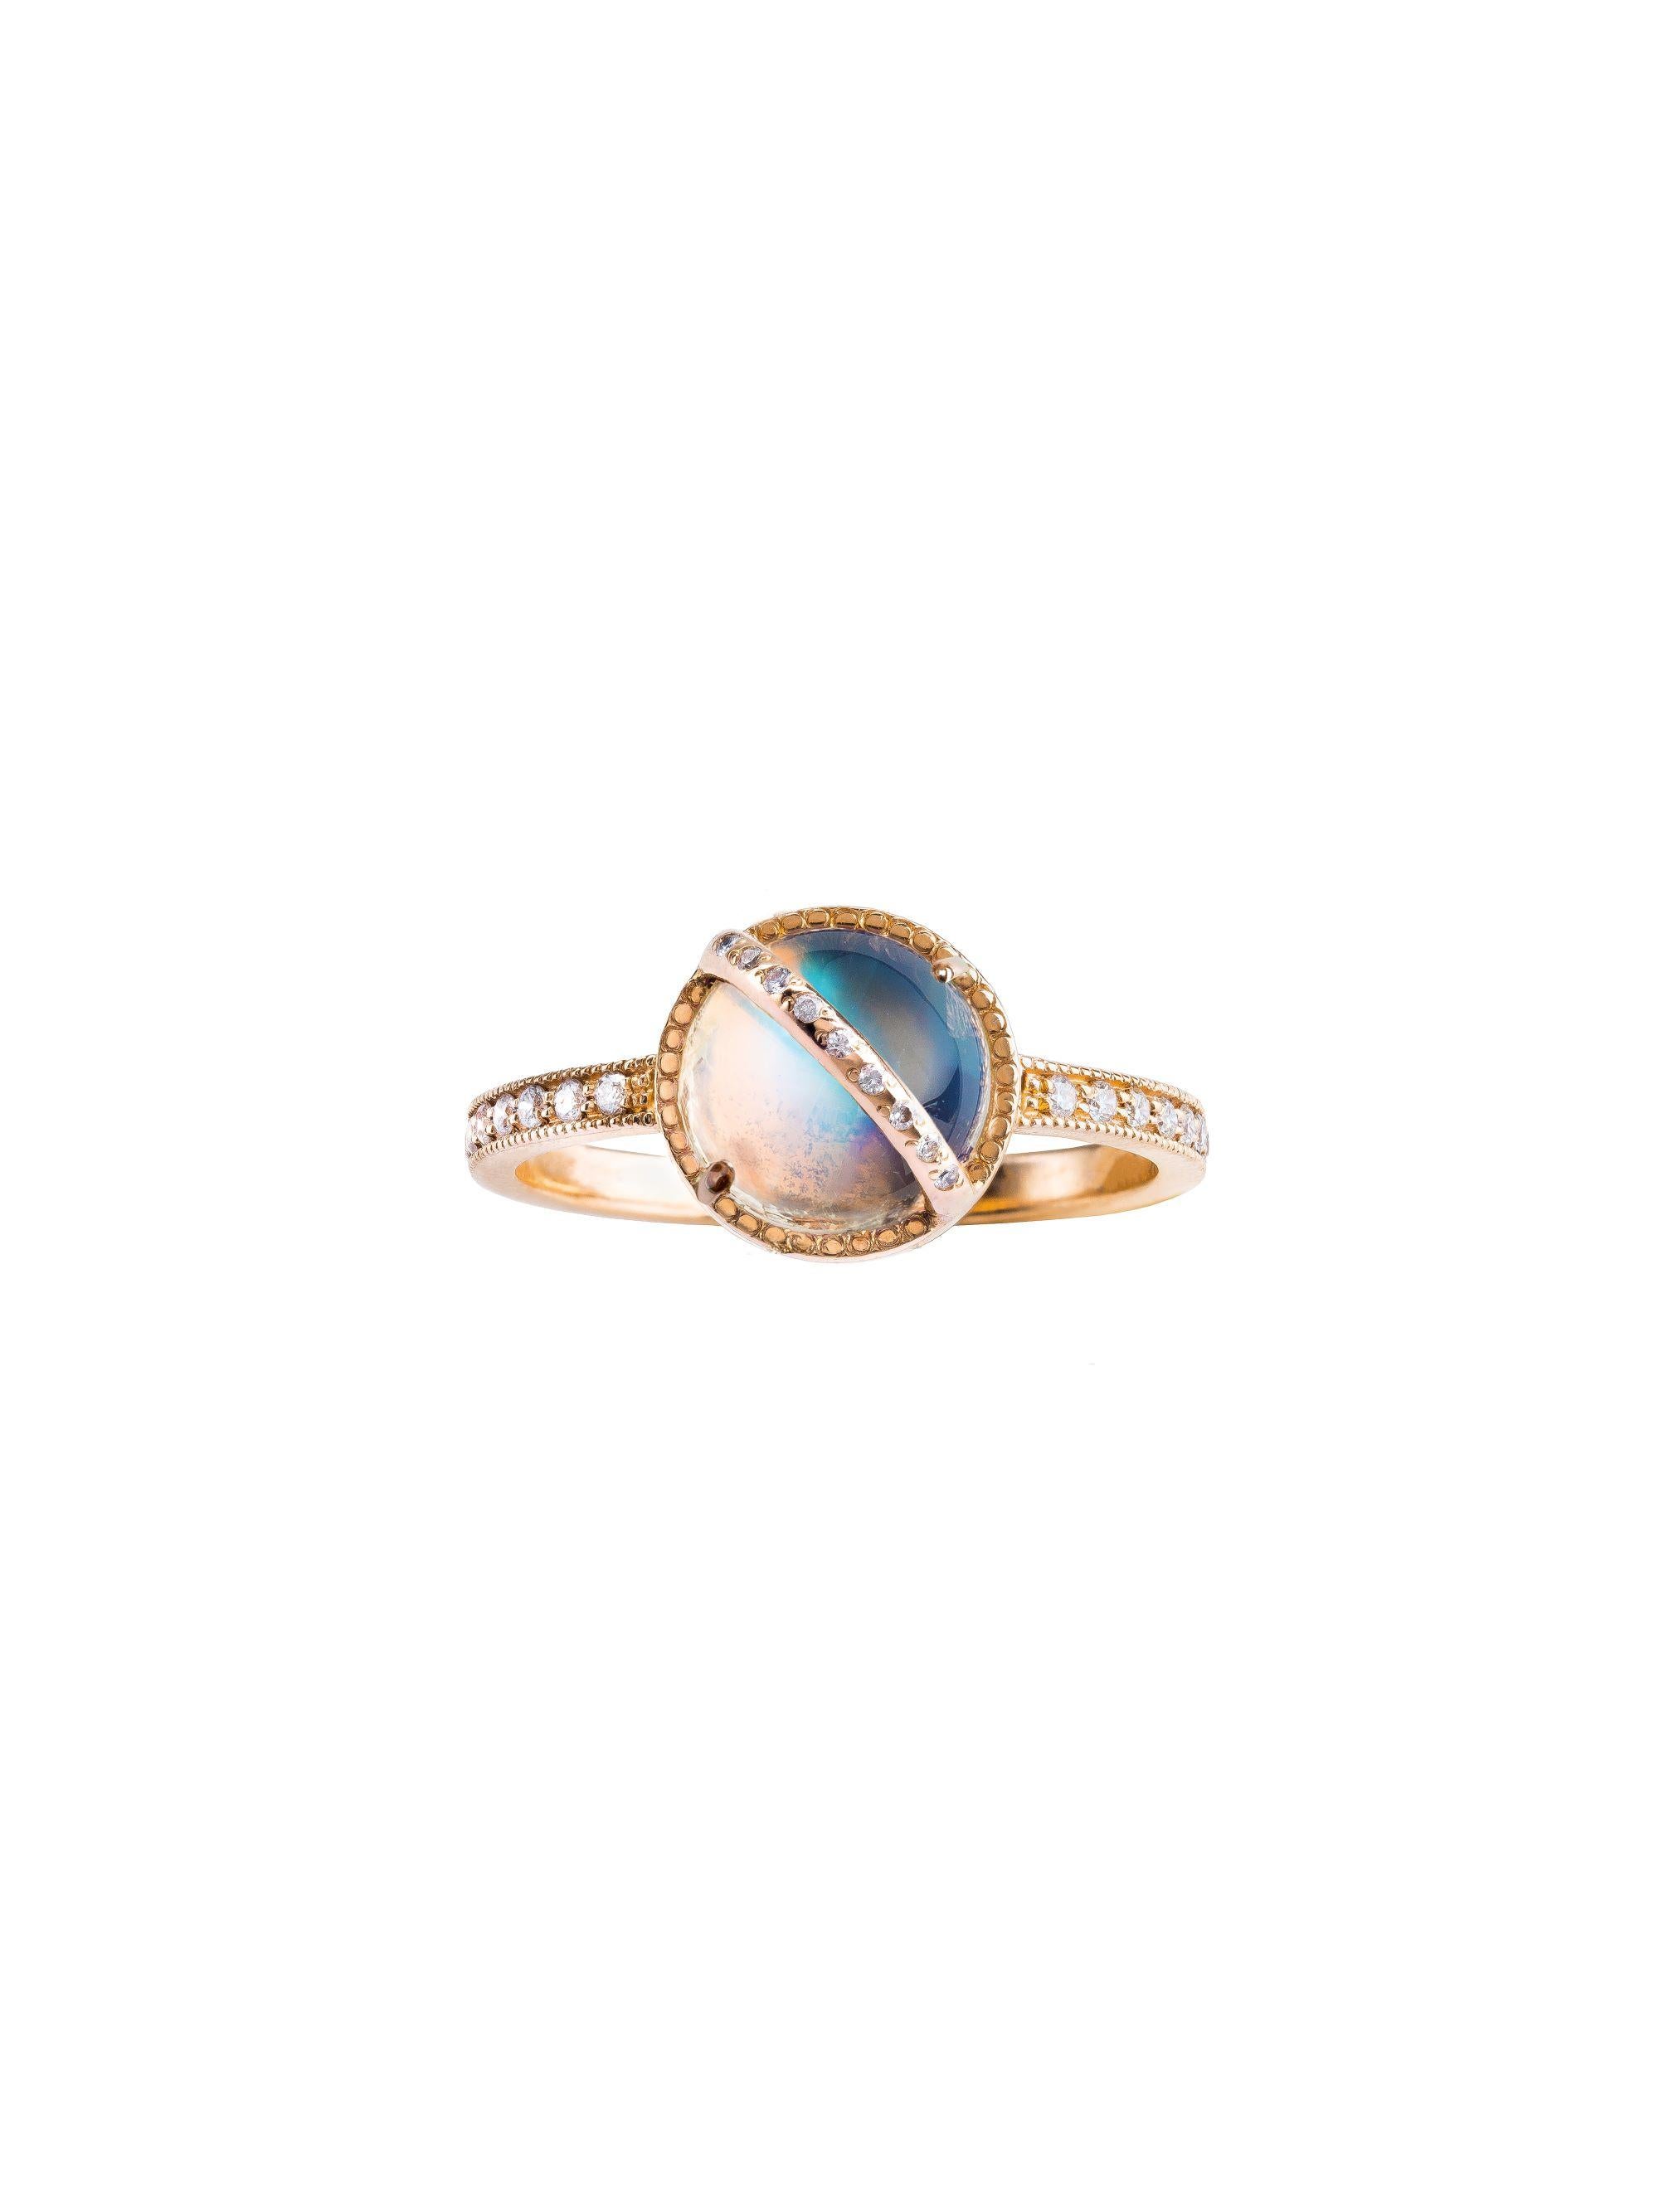 Taygeta Ring 

18kt rose gold, 1.90 ct Rainbow Moonstone round cabochon, 0.15 ct White Diamonds, 2.90 gr total gold.
This magical piece is exquisite on its own, or can be mixed and stacked with an Electra or Celaeno ring for a total cosmic